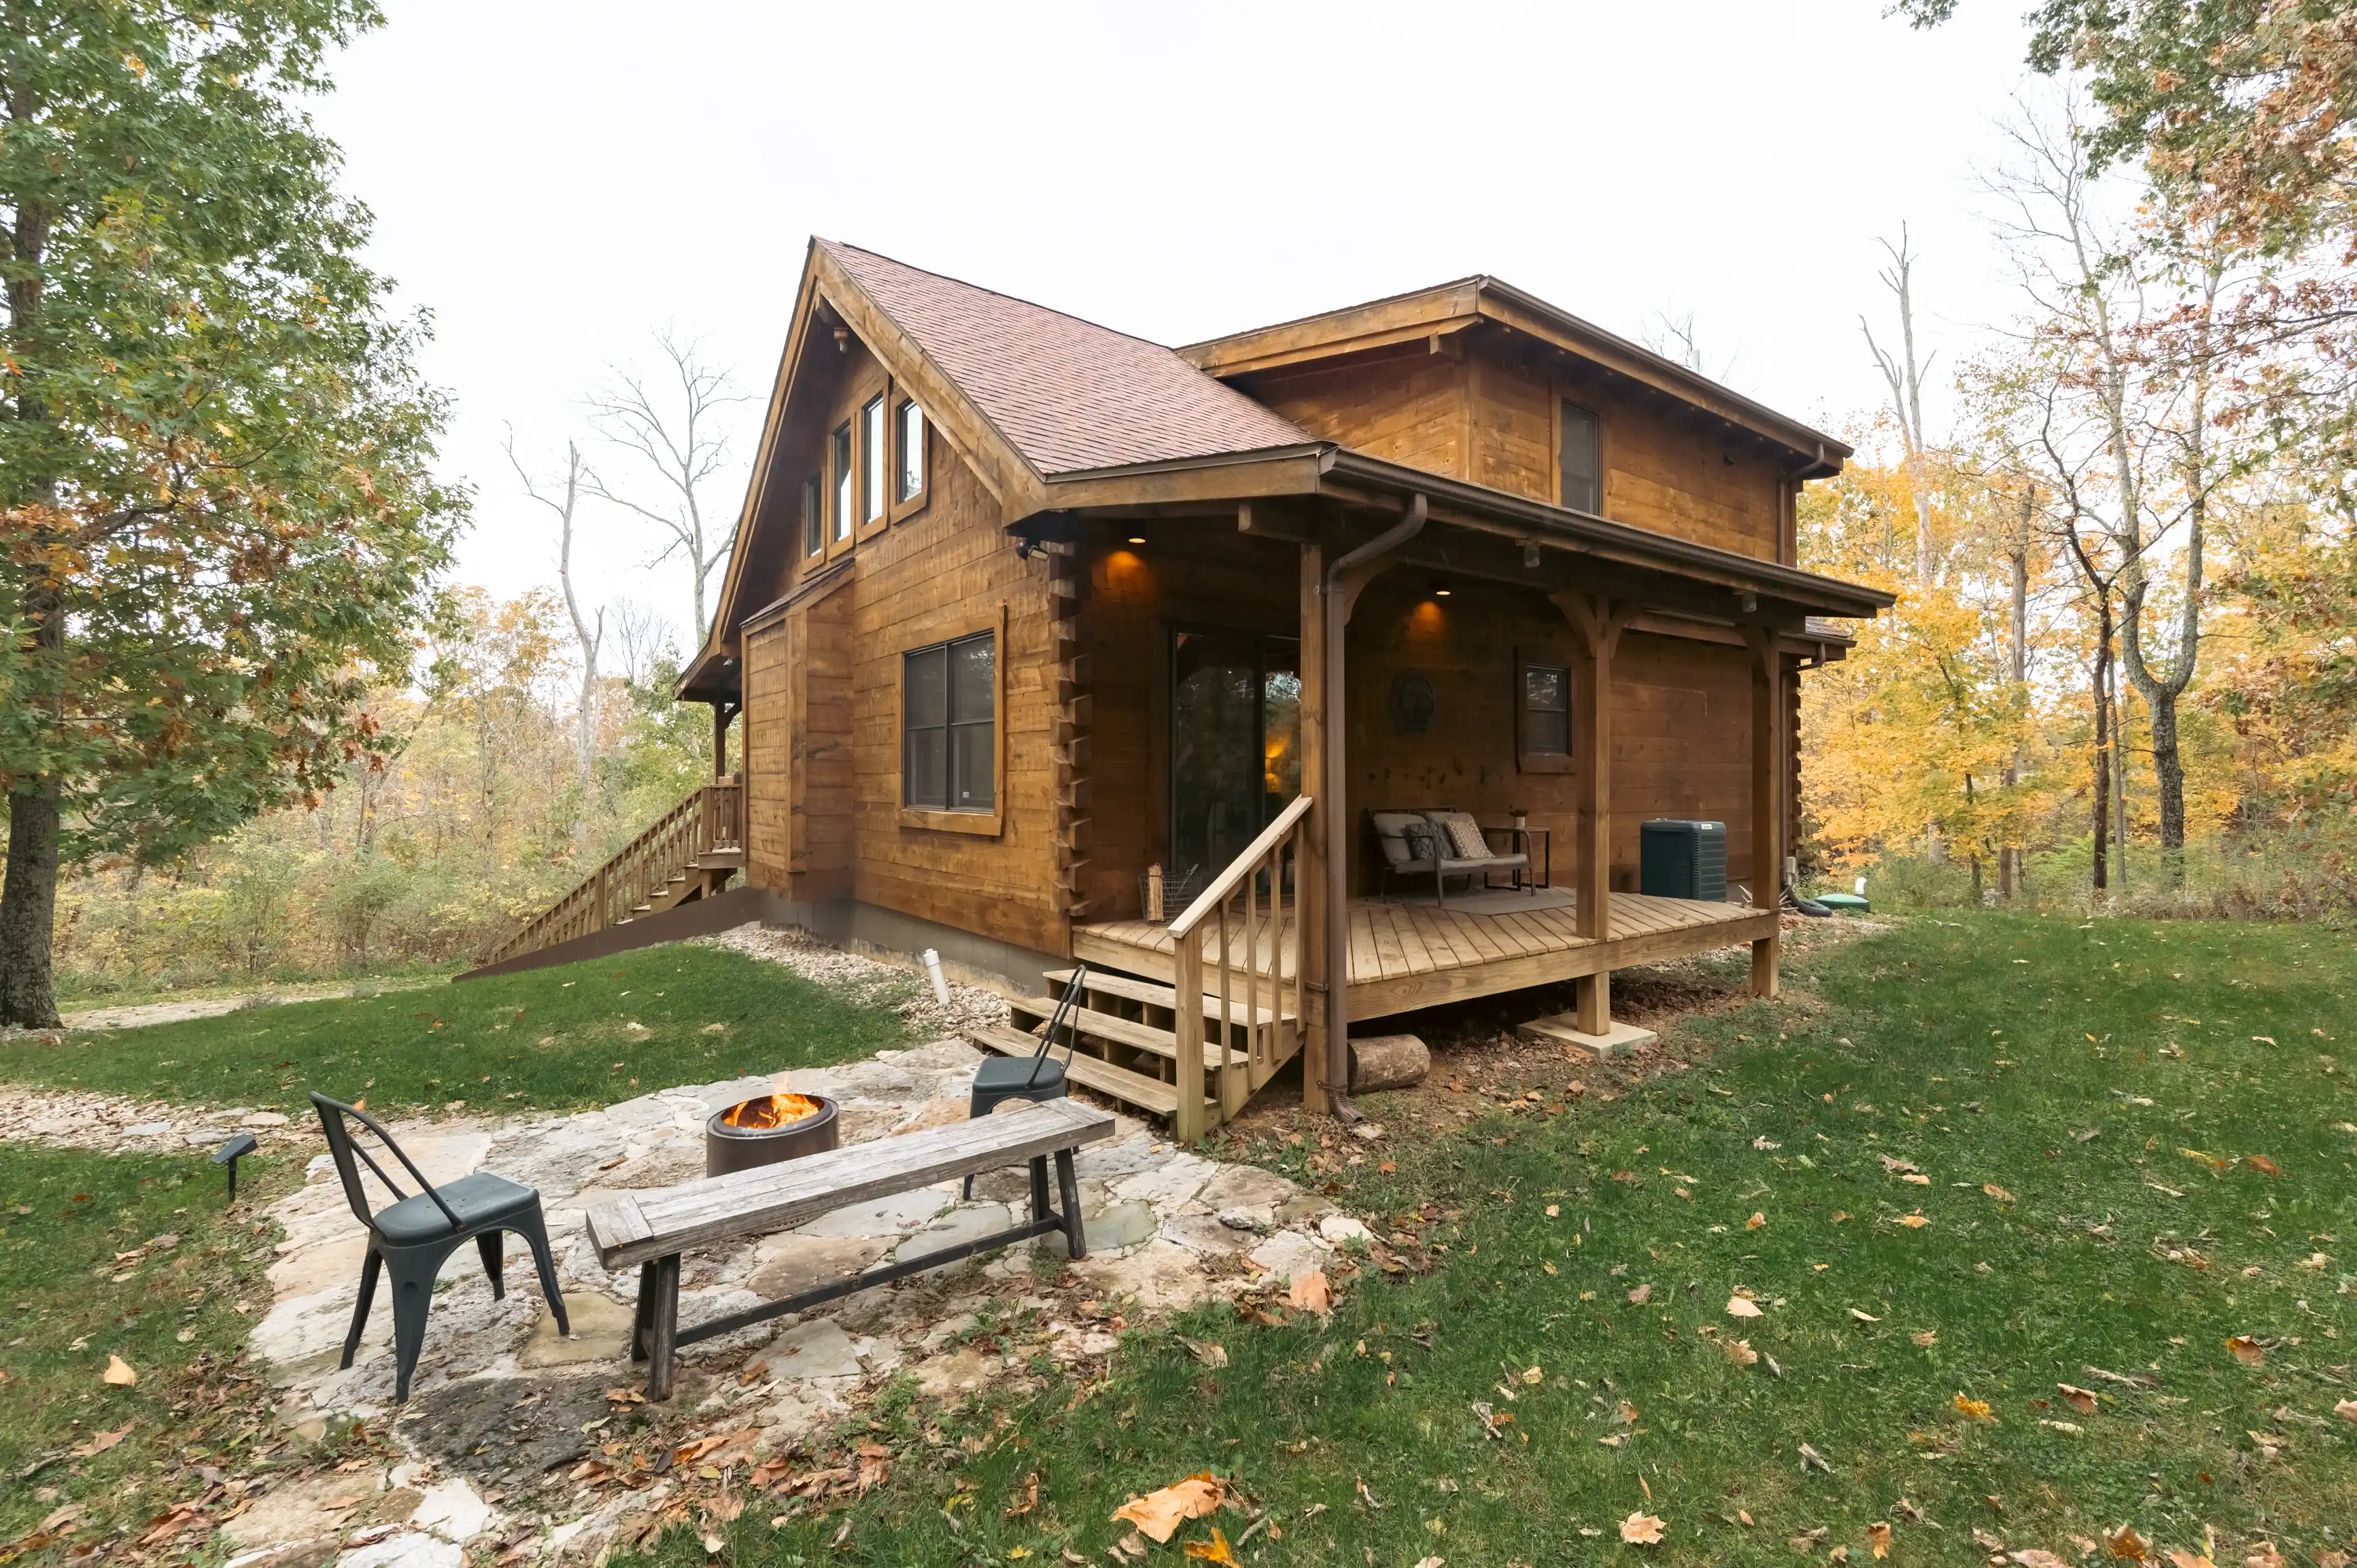 Rustic wooden cabin with a porch and outdoor fire pit surrounded by autumn foliage.